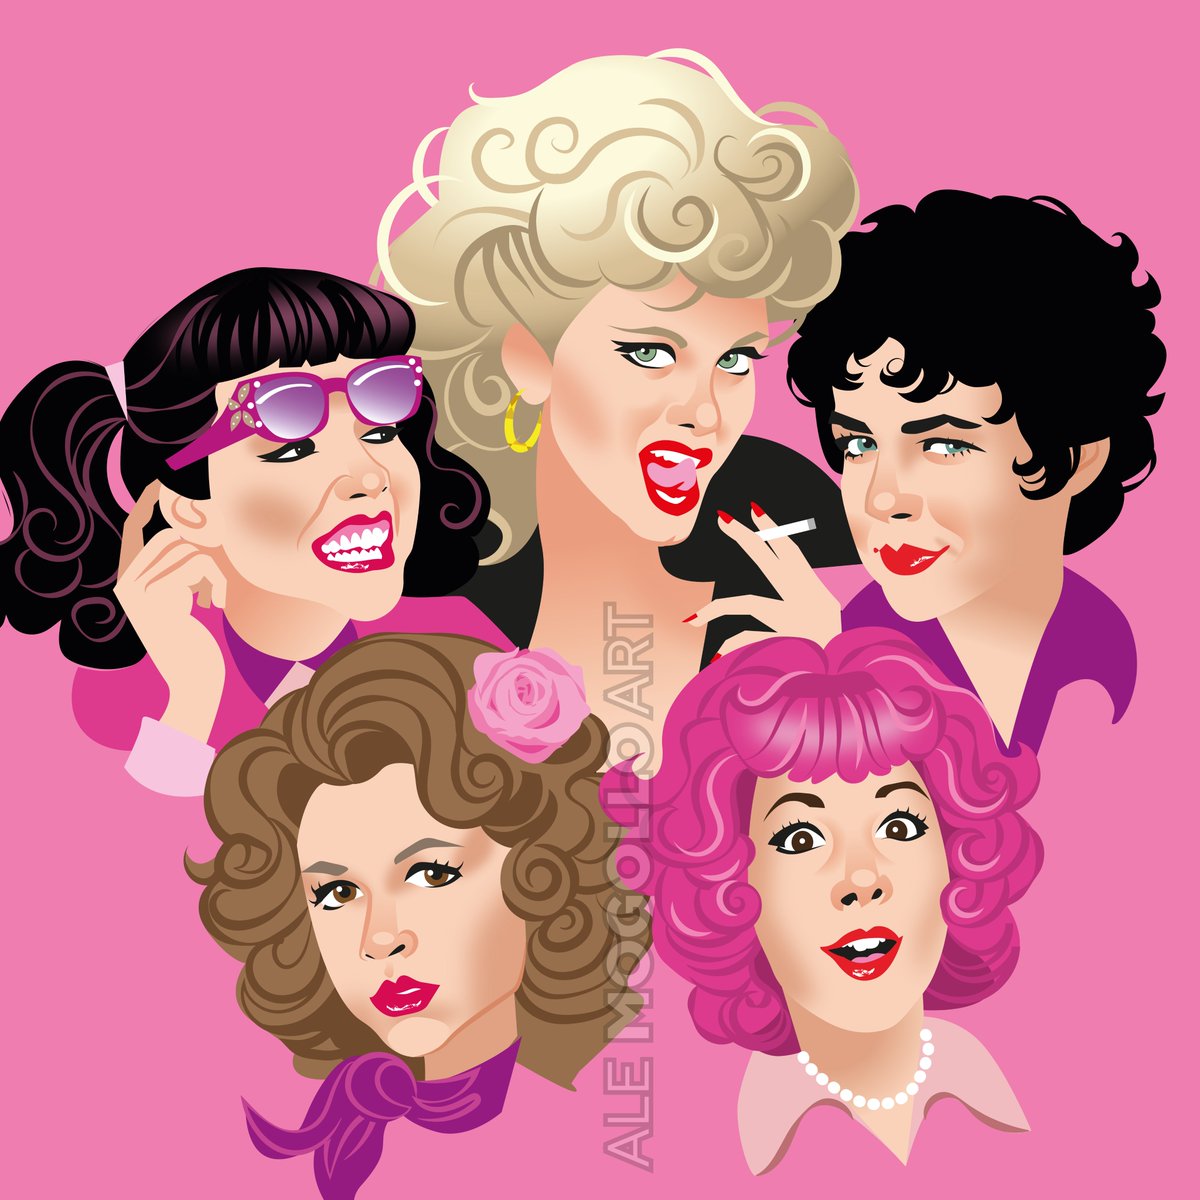 'On Wednesdays we wear pink” 💕
#grease #olivianewtonjohn #sandy #rizzo #tellmeaboutitstud #Grease45 #pinkladies #alejandromogolloart #TCMParty #FilmTwitter